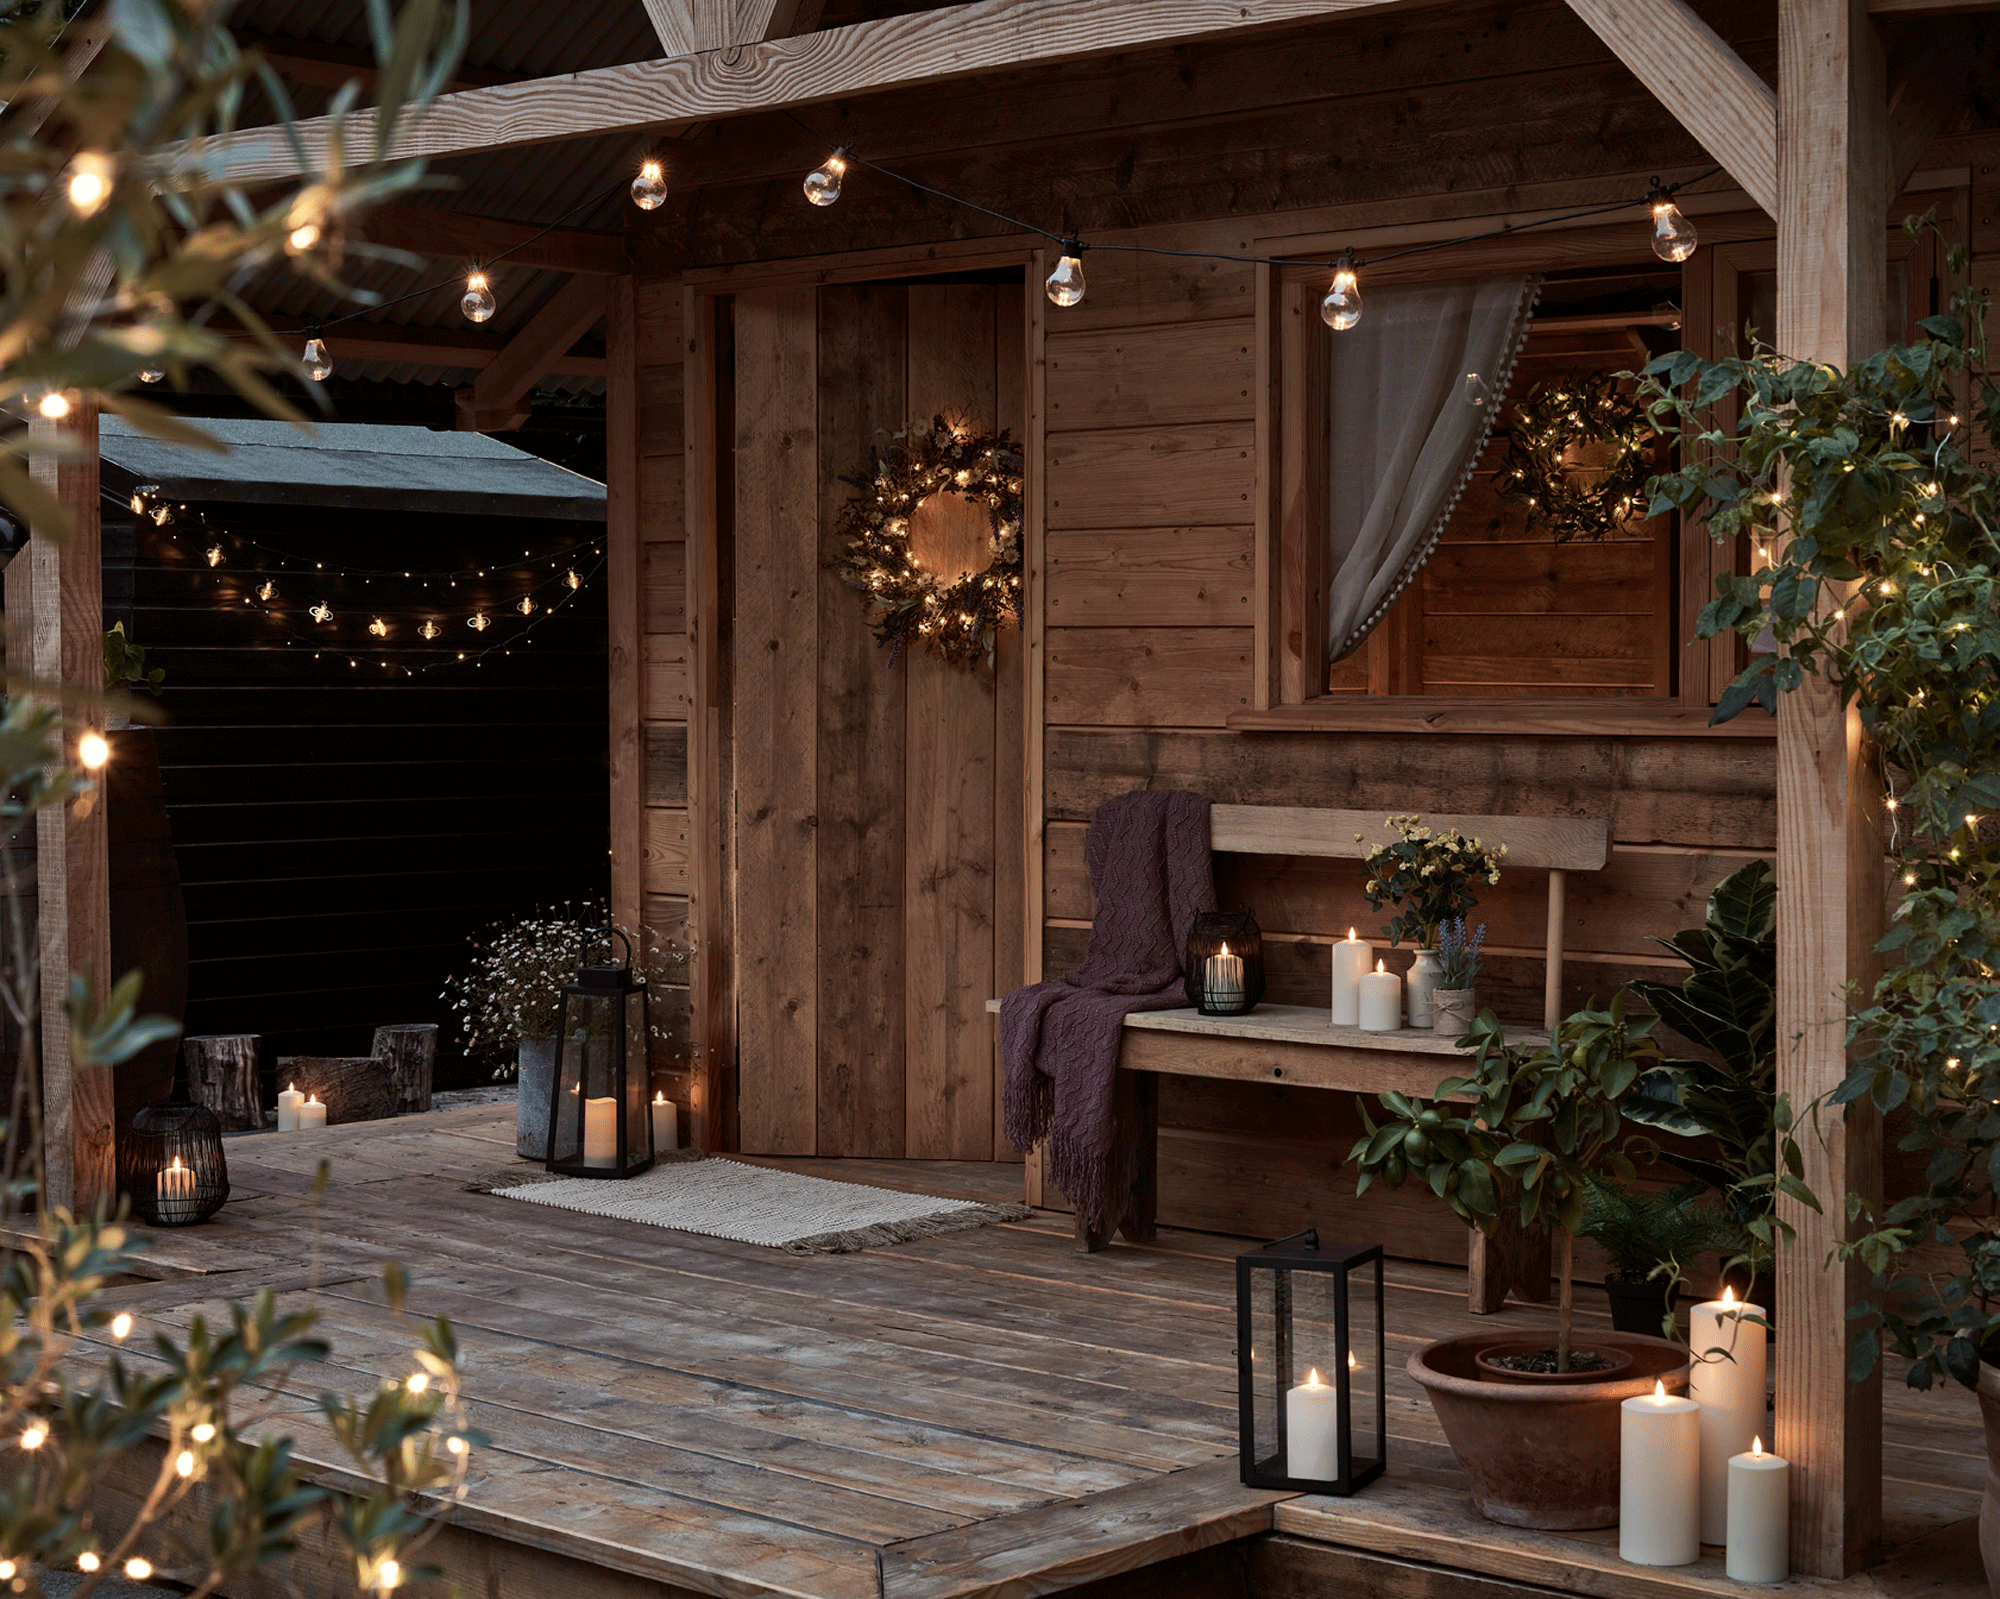 Ambient porch setting with candles and festoon lights.